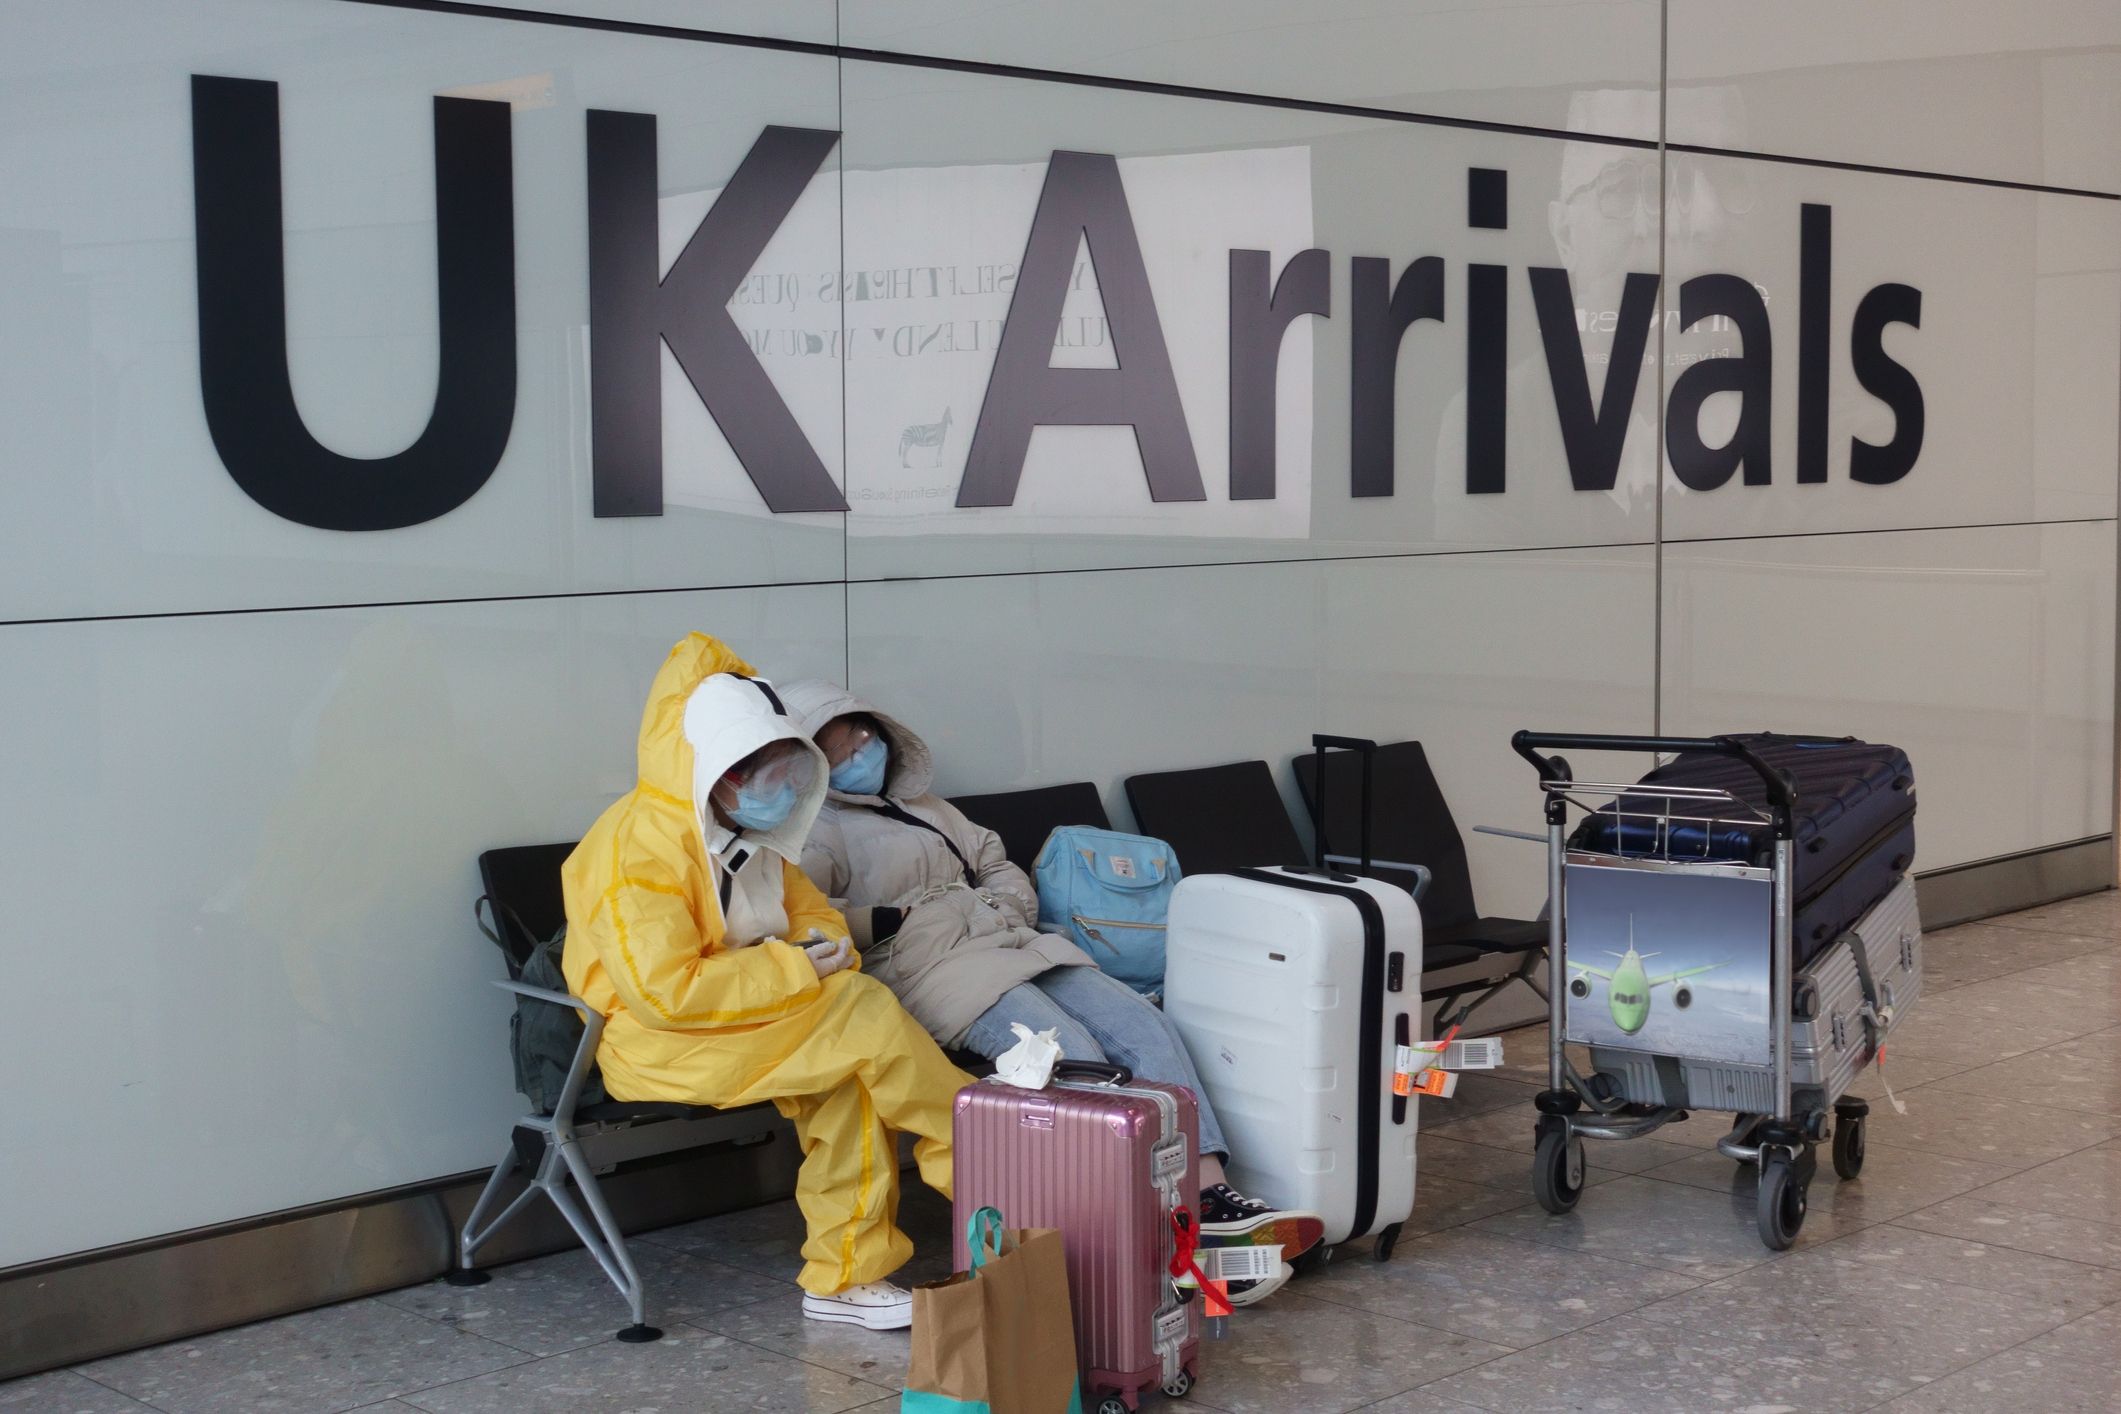 Asylum seekers, who are already vulnerable, have been hit hard by the coronavirus